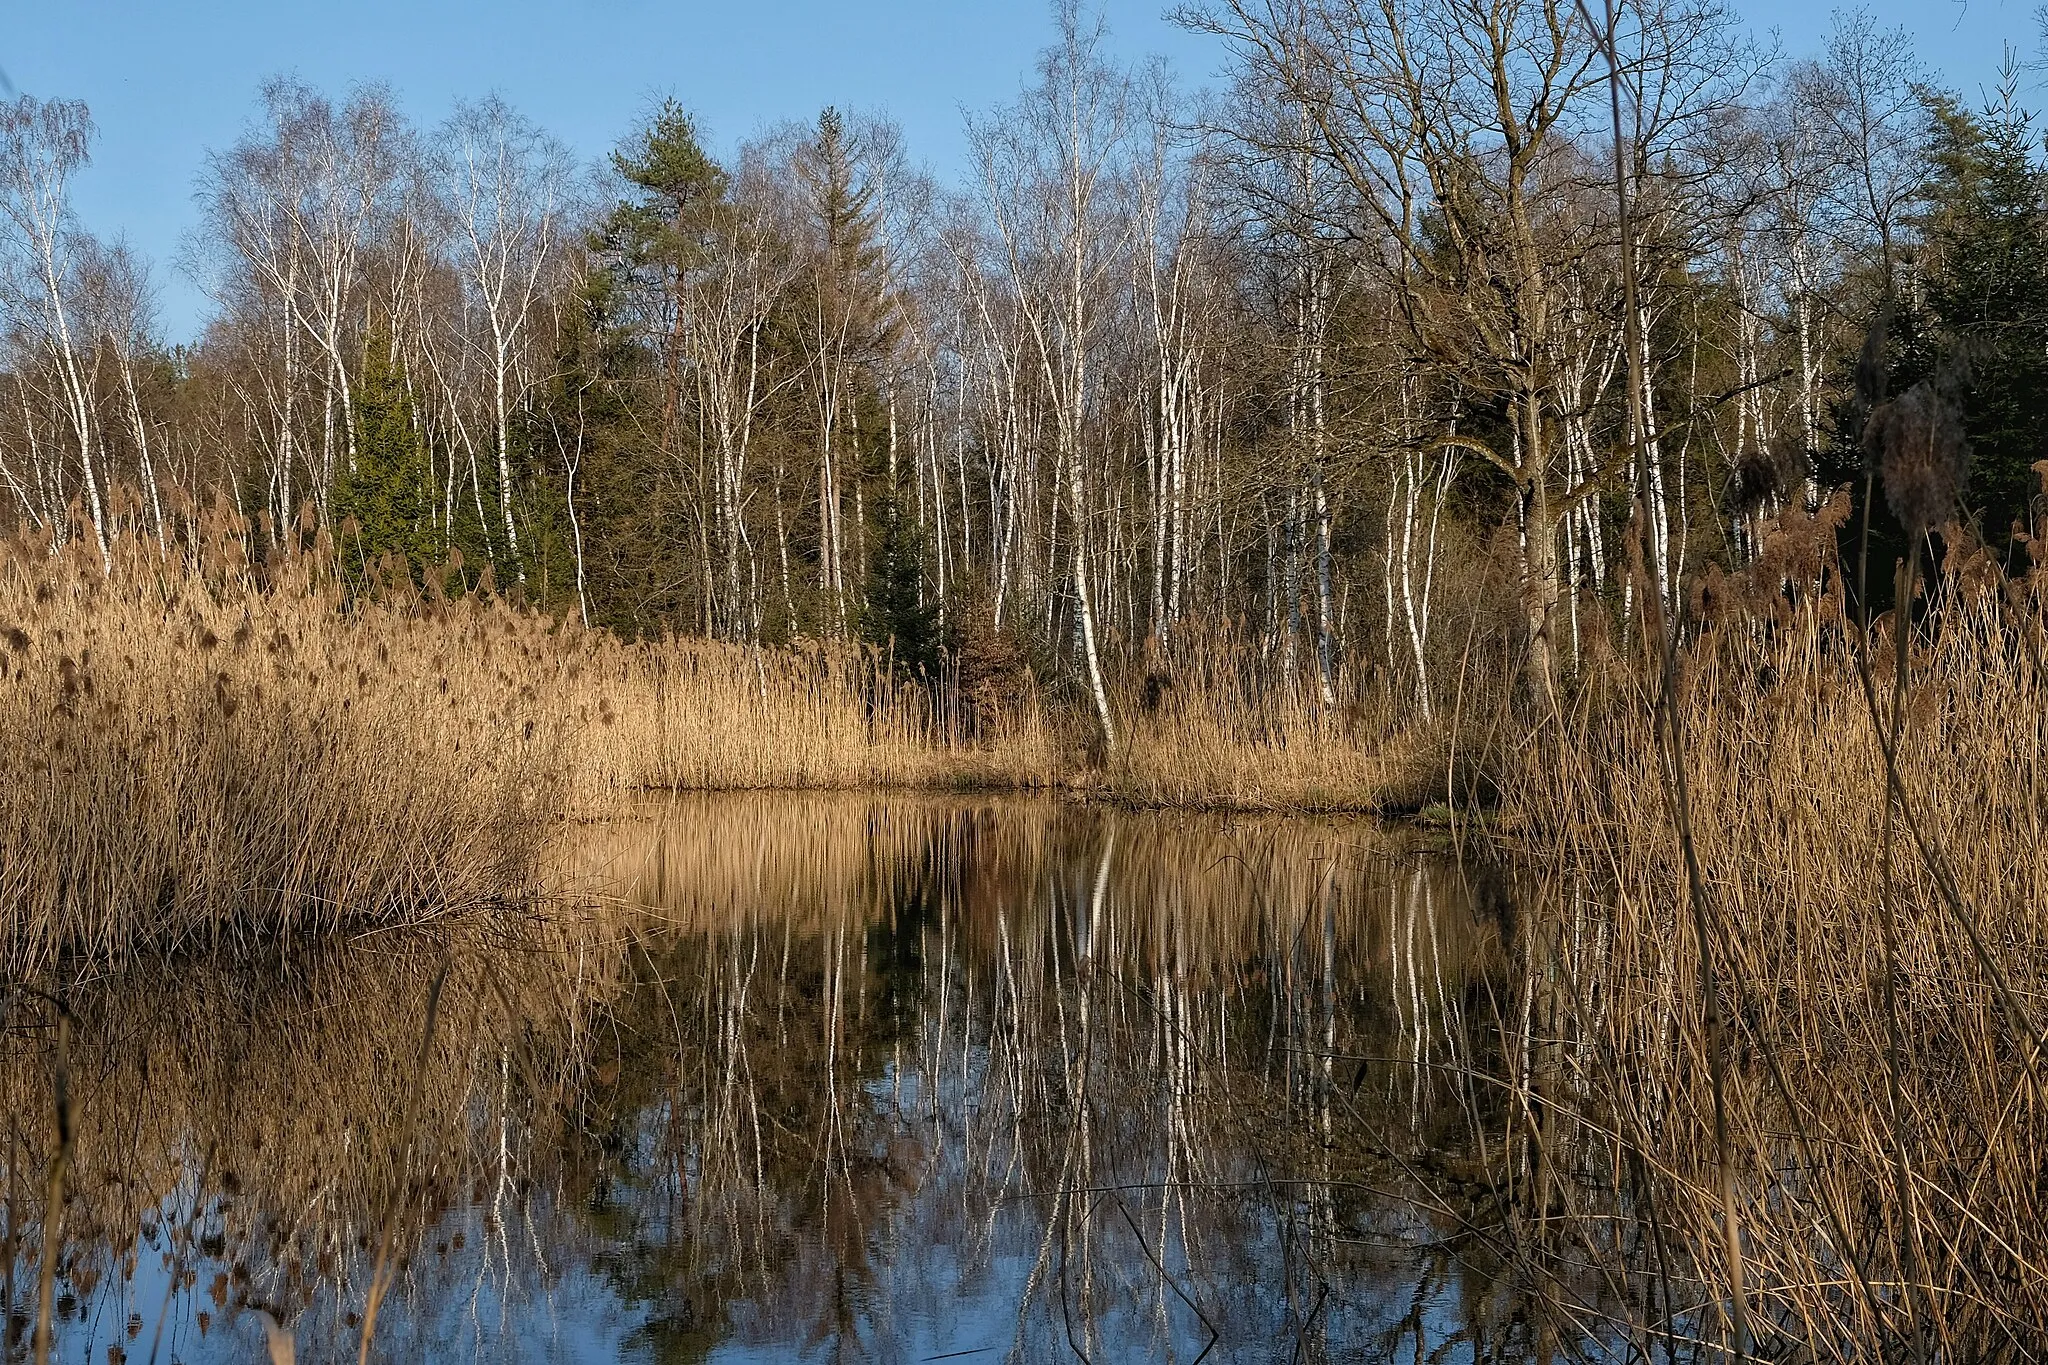 Photo showing: The Hudelmoos comprises three nationally important protected areas: a fen, a raised/transitional mire and an amphibian spawning area in the nature reserve of Zihlschlacht-Sitterdorf.